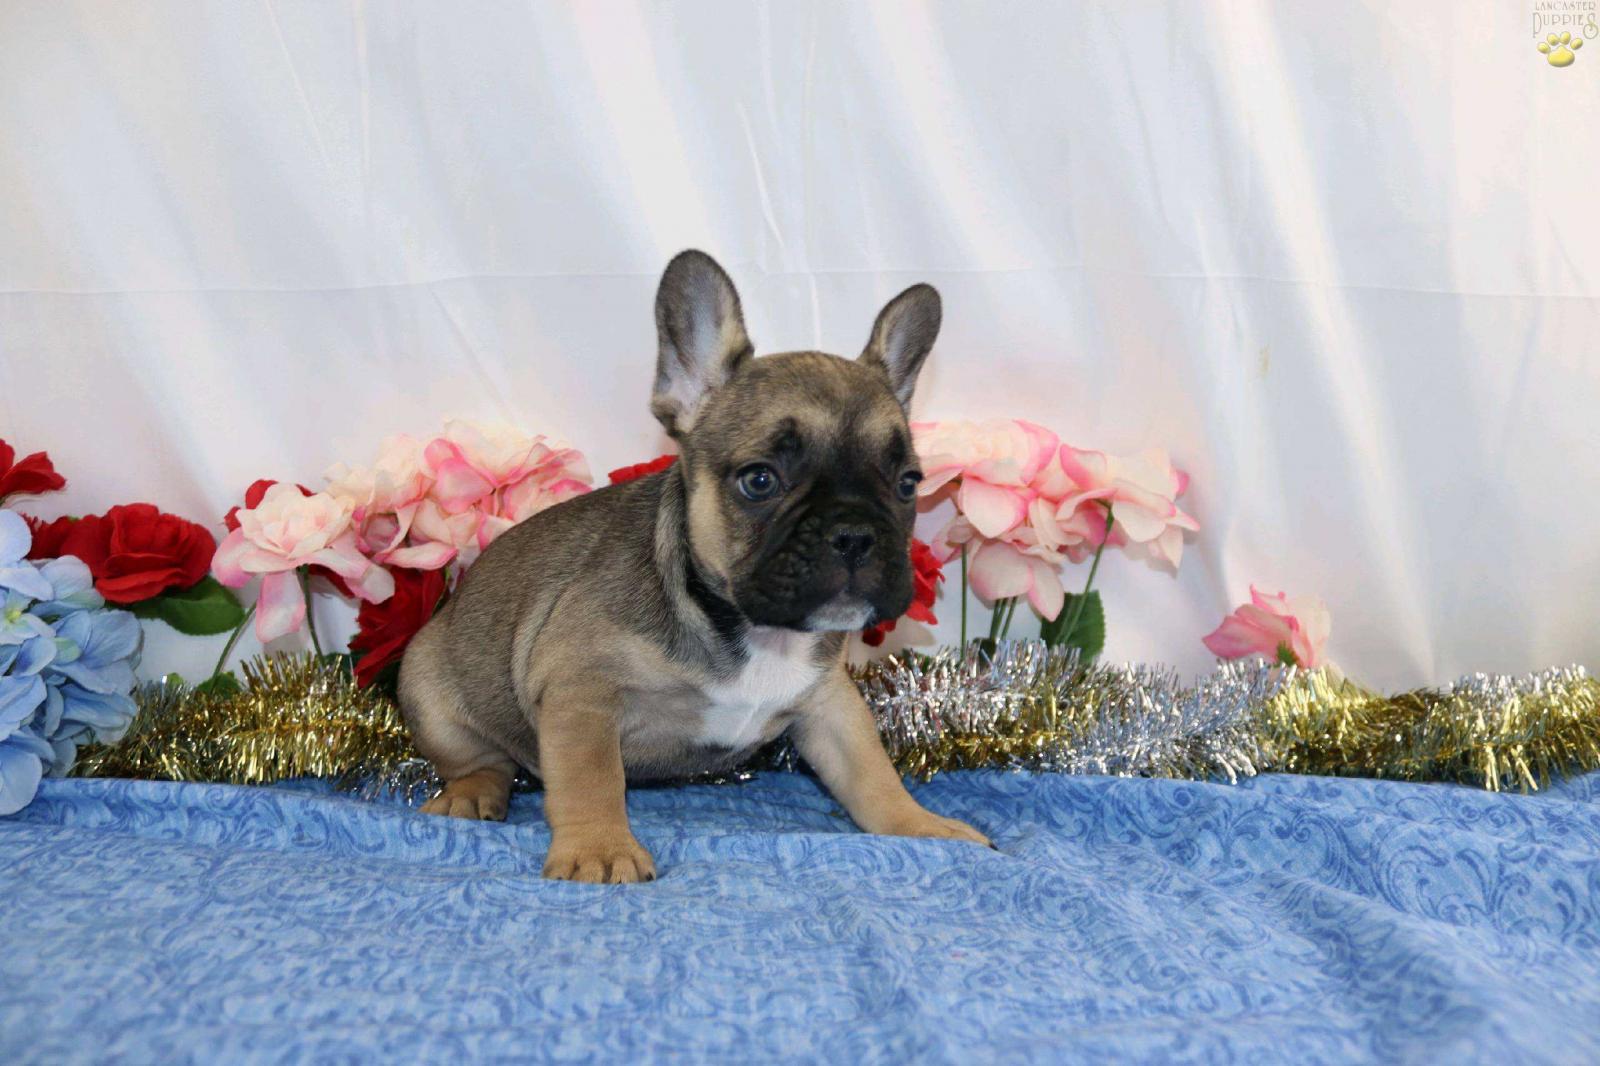 Training Your Frenchie: Here’s What You Need to Know